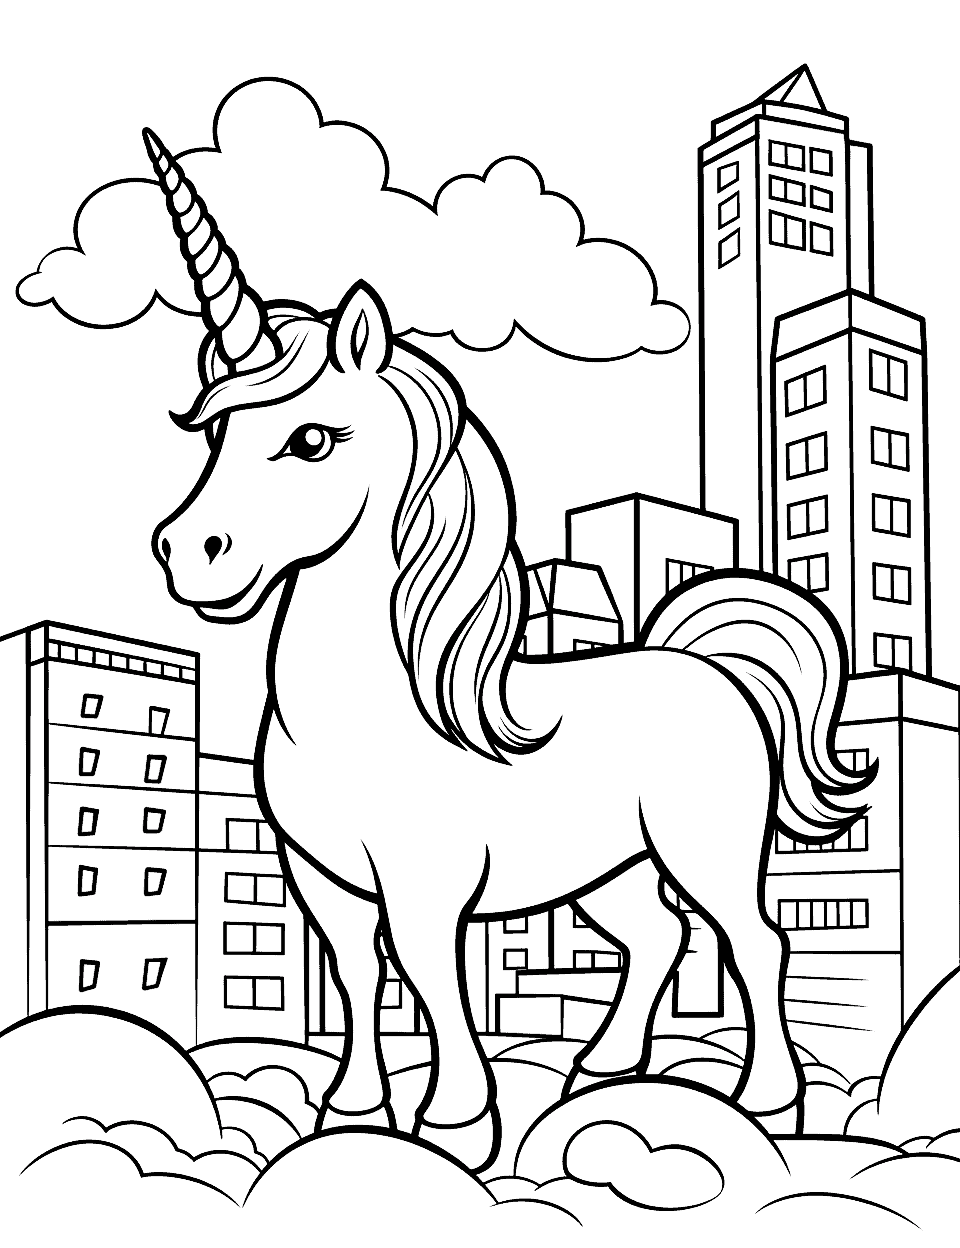 Unicorn and Street Art Coloring Page - A unicorn in an urban setting, with the cityscape.